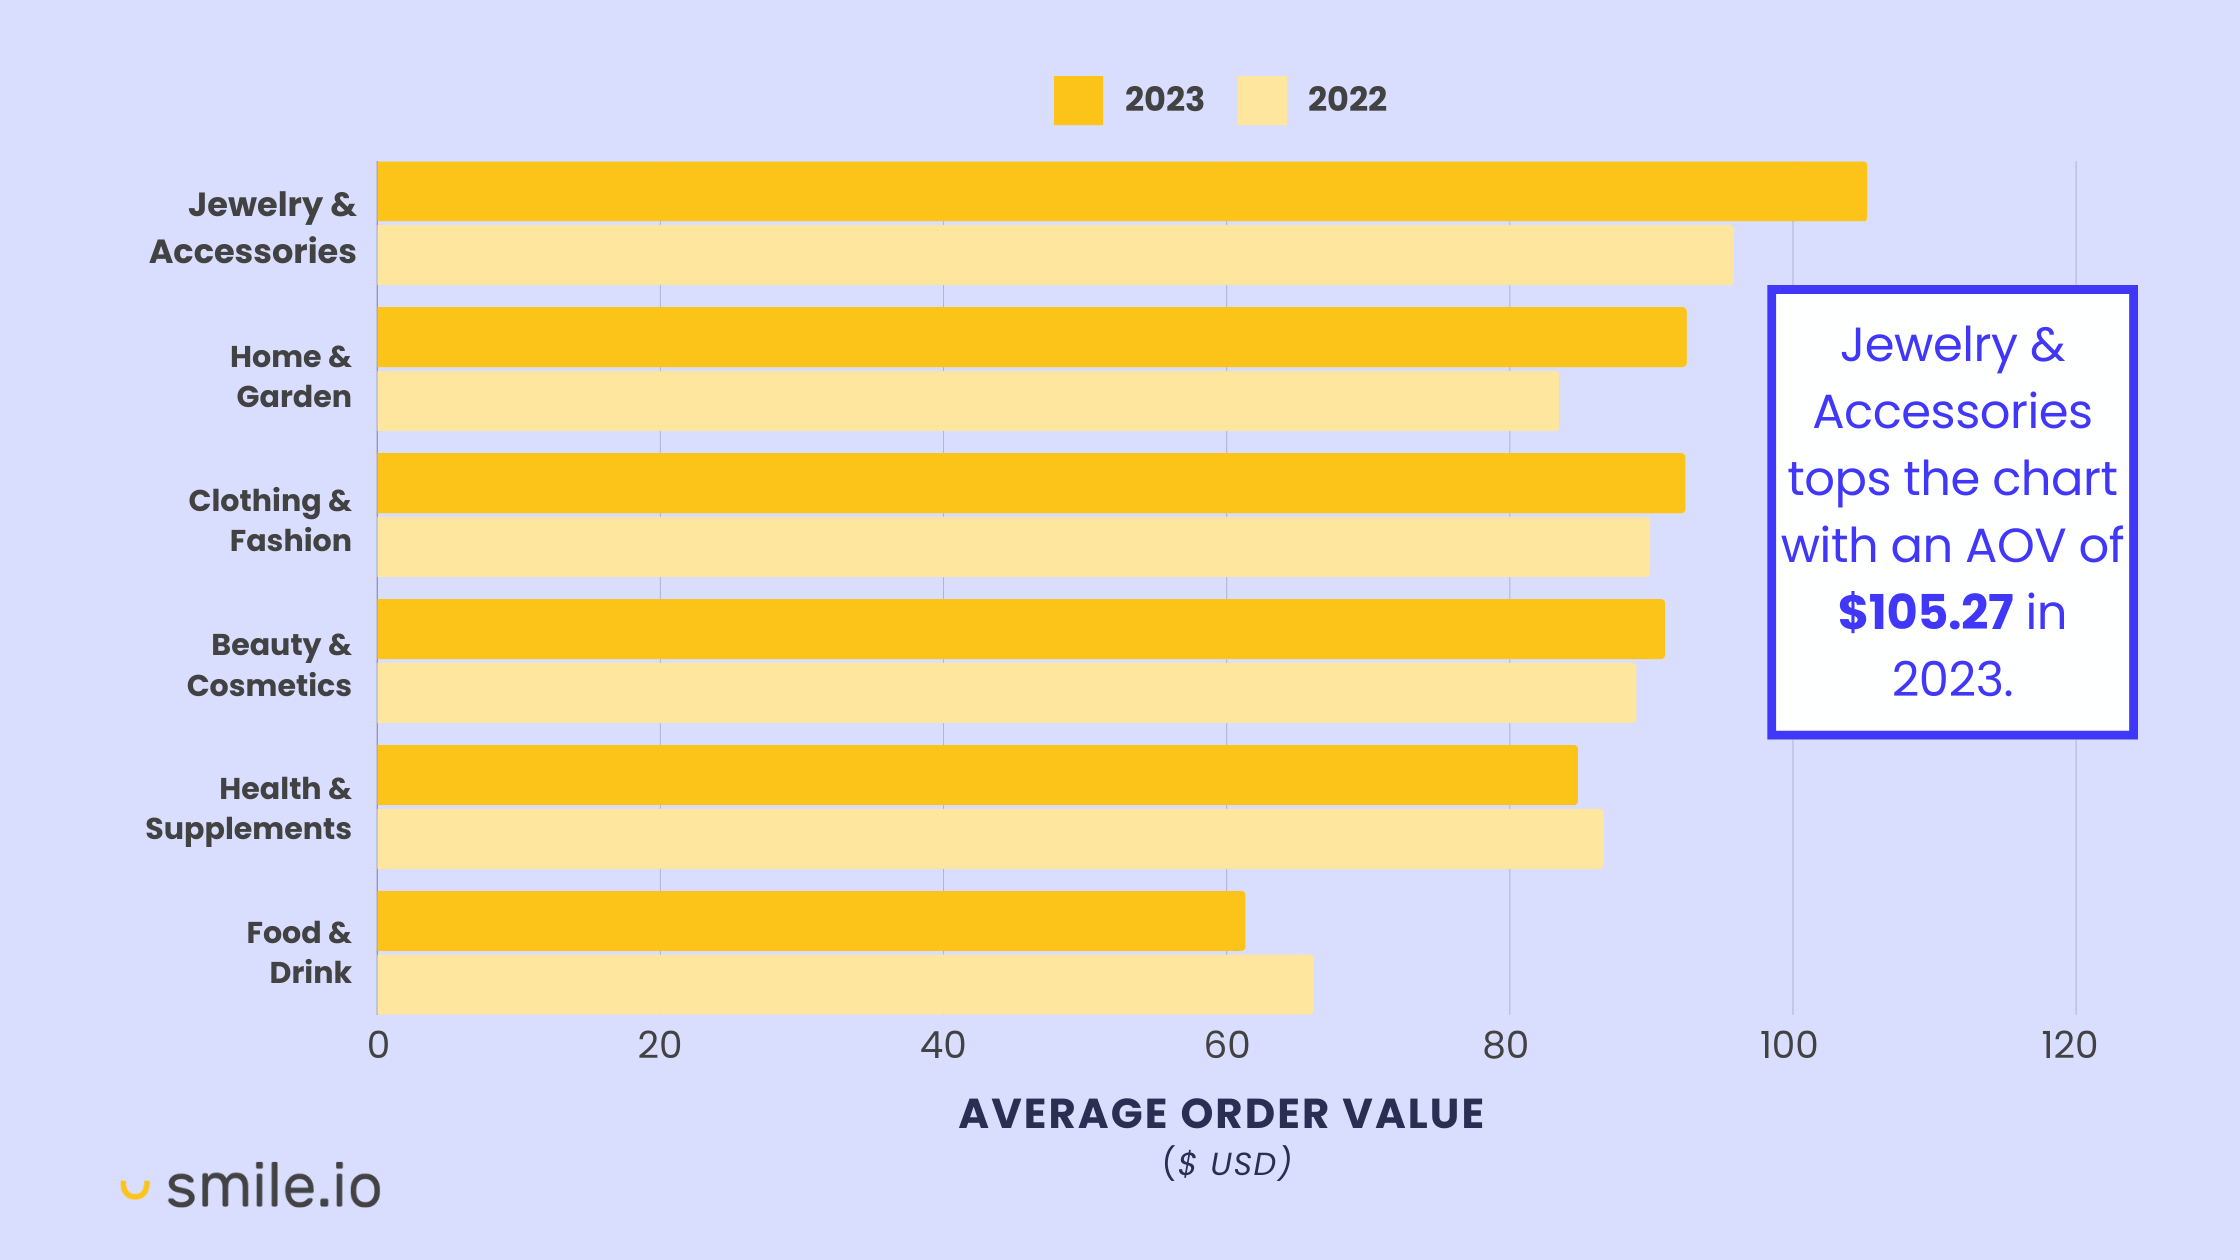 A bar graph showing the year-over-year changes in Average Order Value for 6 main industries (Jewelry & Accessories, Home & Garden, Clothing & Fashion, Beauty & Cosmetics, Health & Supplements, and Food & Drink). A call-out says Jewelry and Accessories tops the chart with an AOV of $105.27 in 2023.